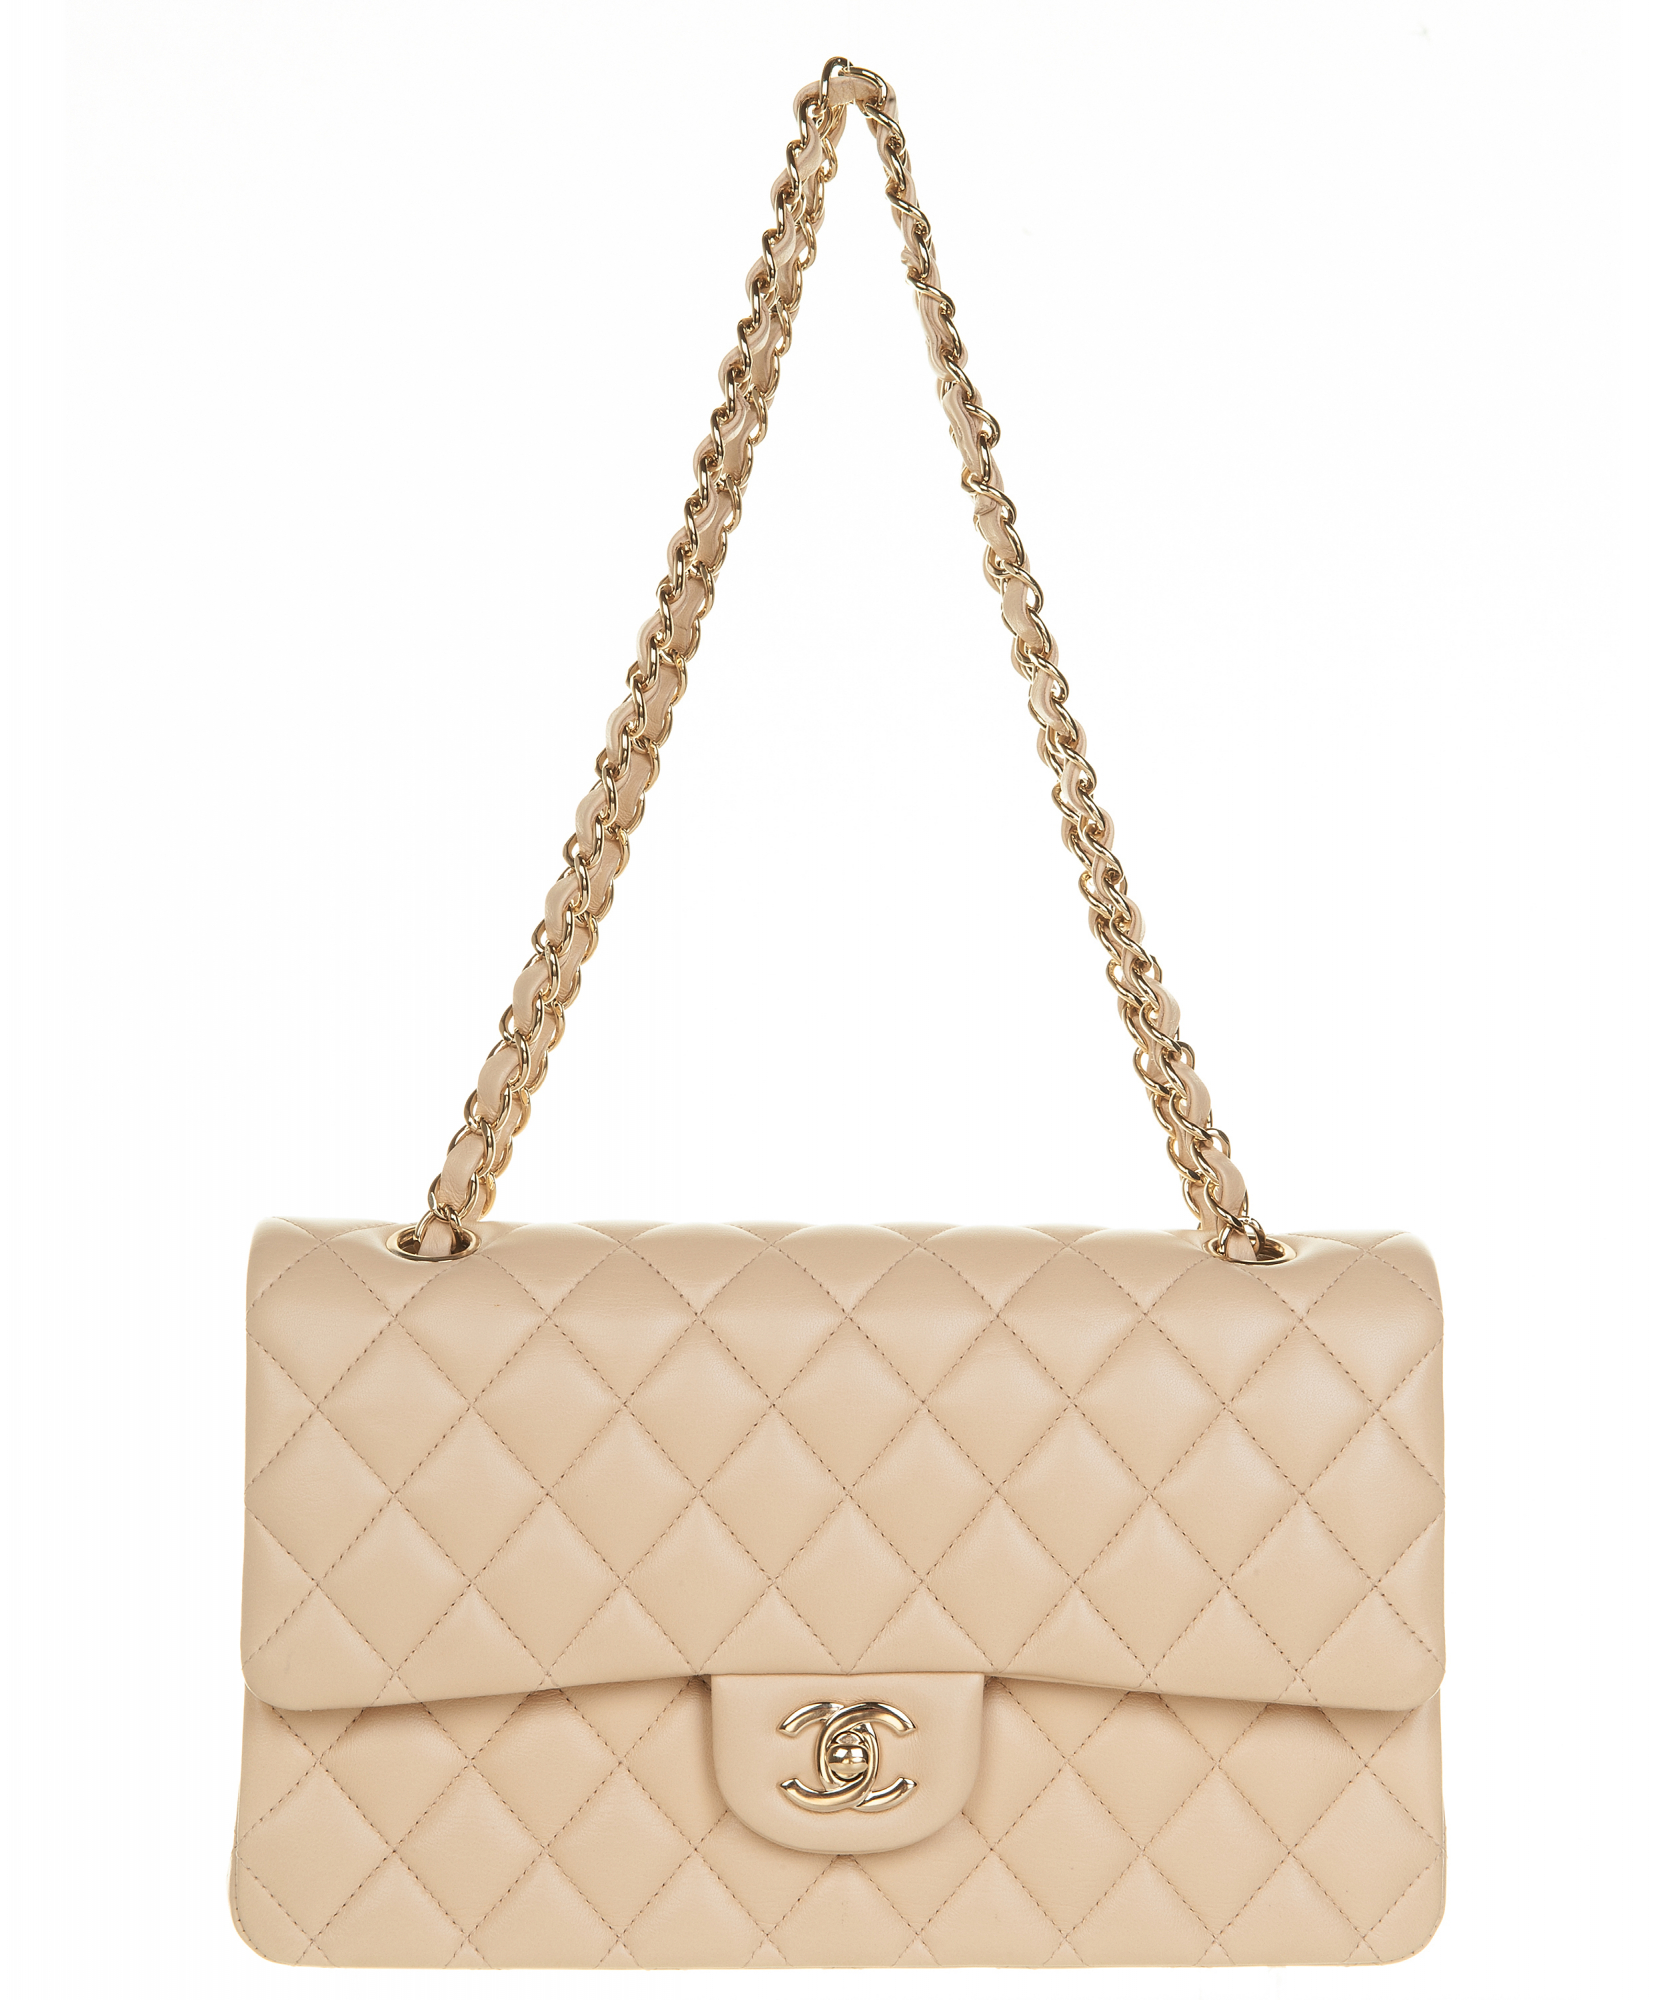 New and Gently Used Chanel Bags, Accessories & Clothing – Page 20 – VSP  Consignment